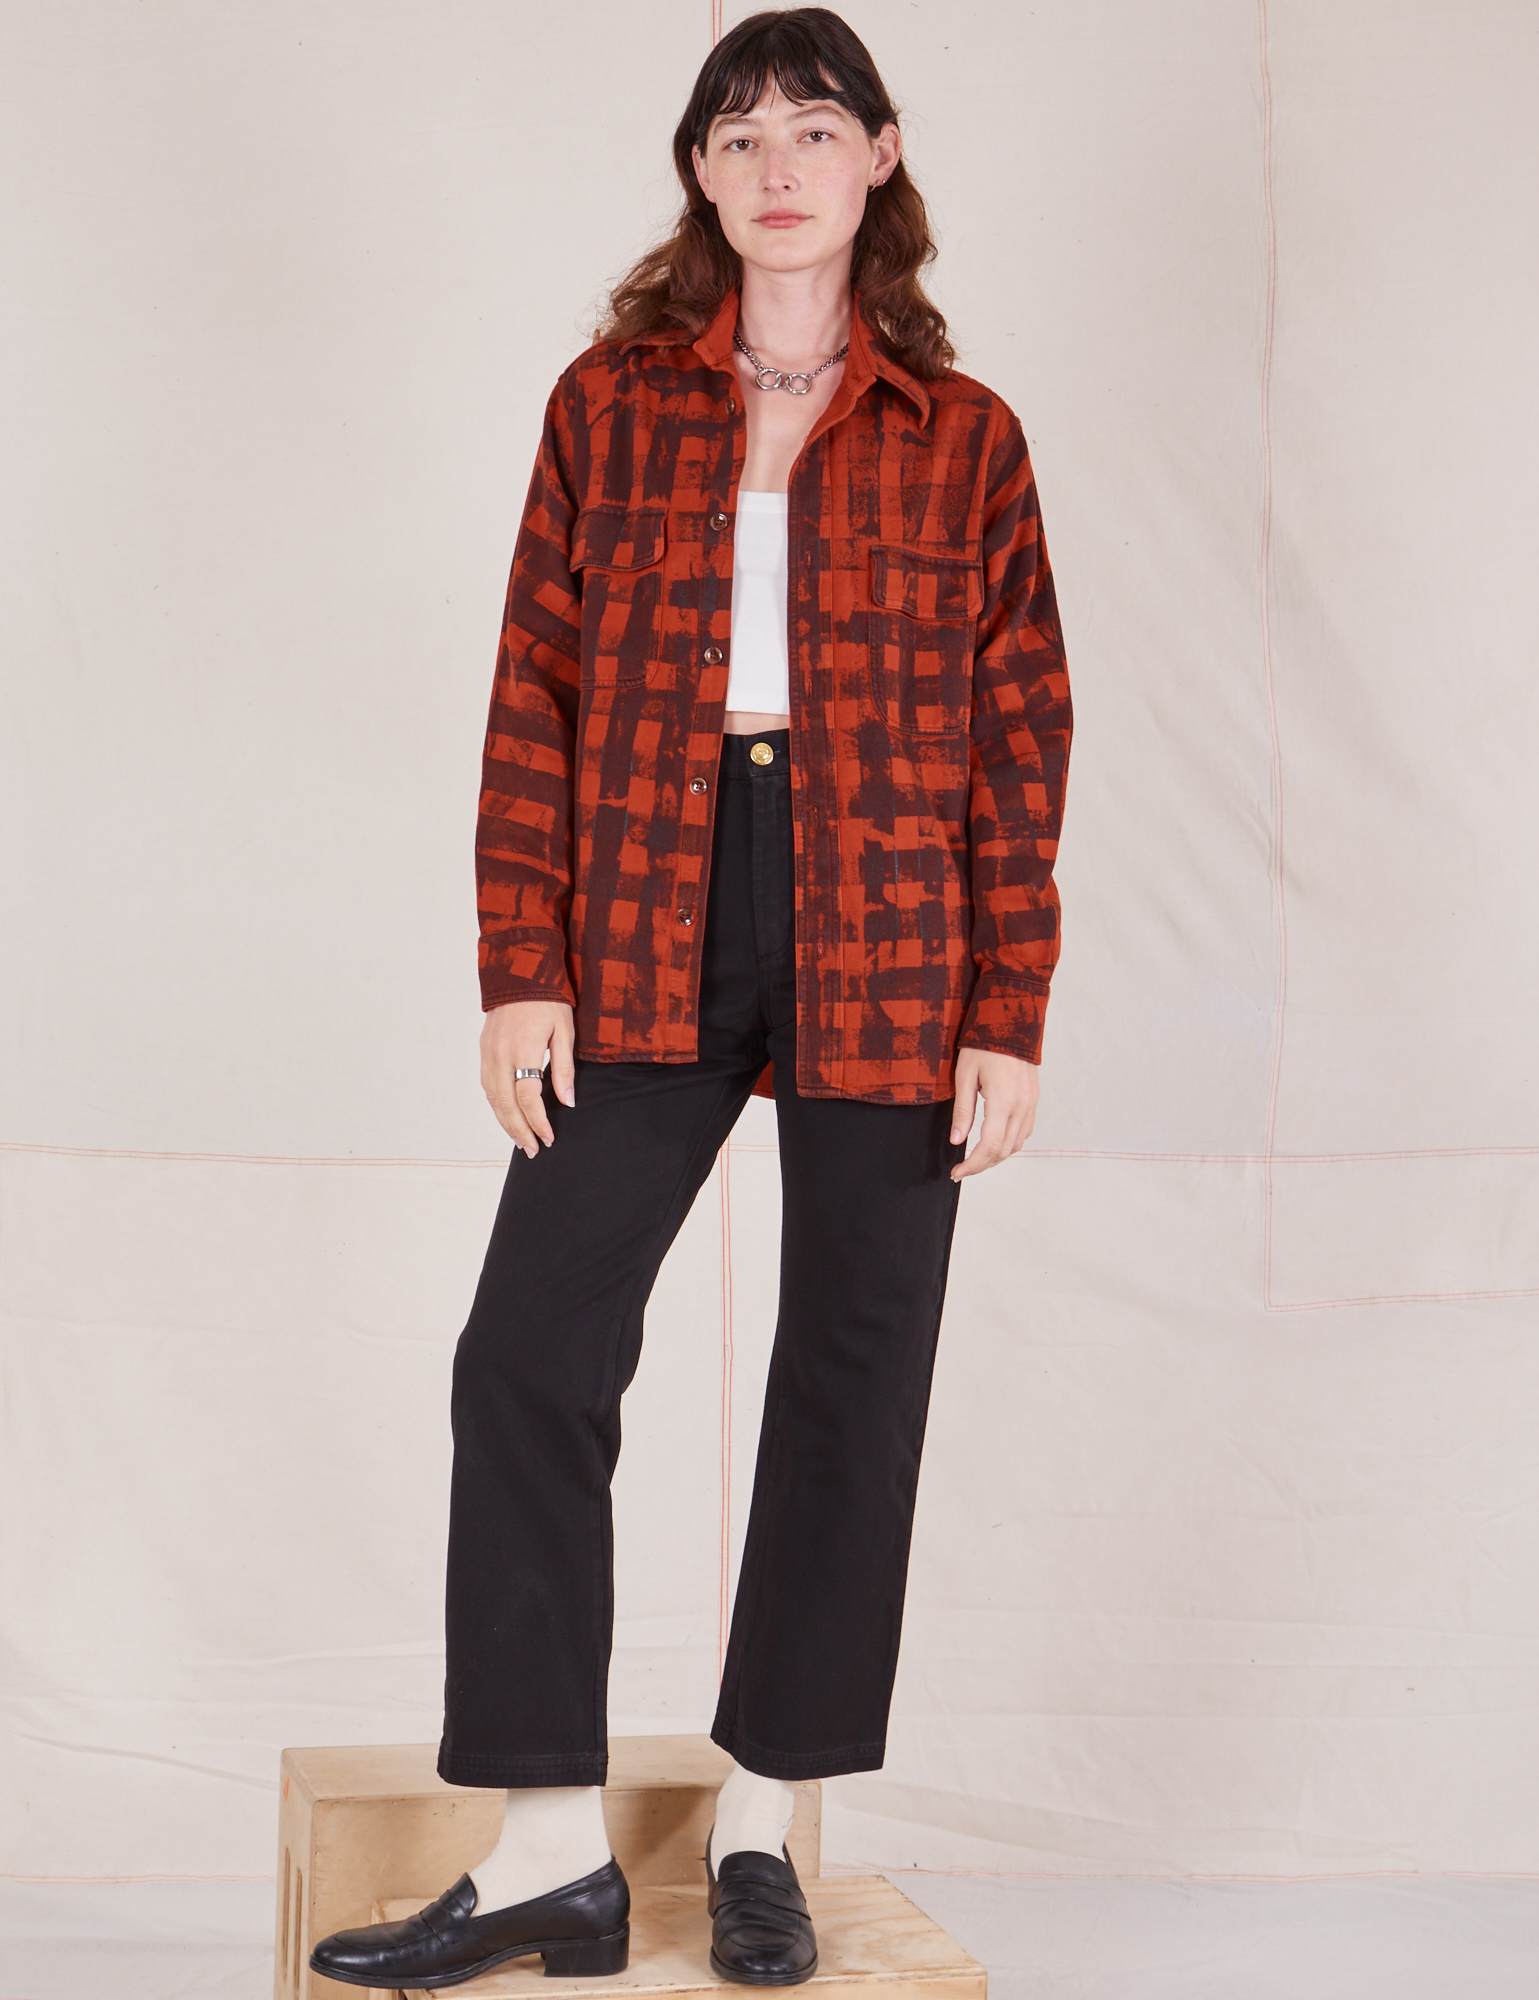 Alex is 5'8" and wearing P Plaid Flannel Overshirt in Paprika paired with black Work Pants